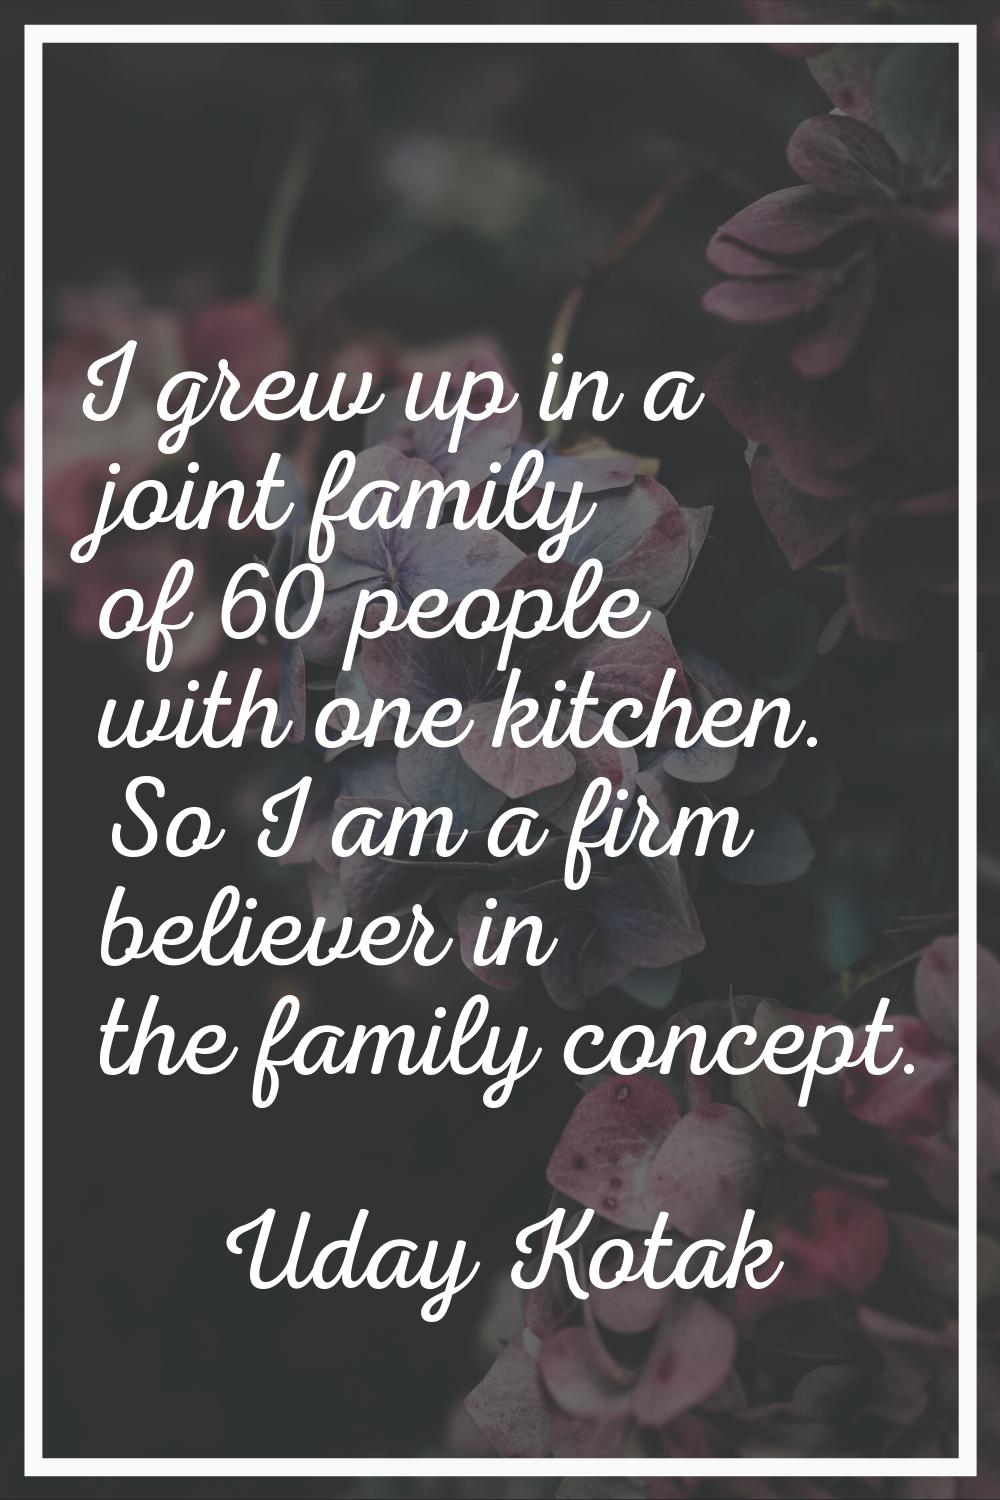 I grew up in a joint family of 60 people with one kitchen. So I am a firm believer in the family co